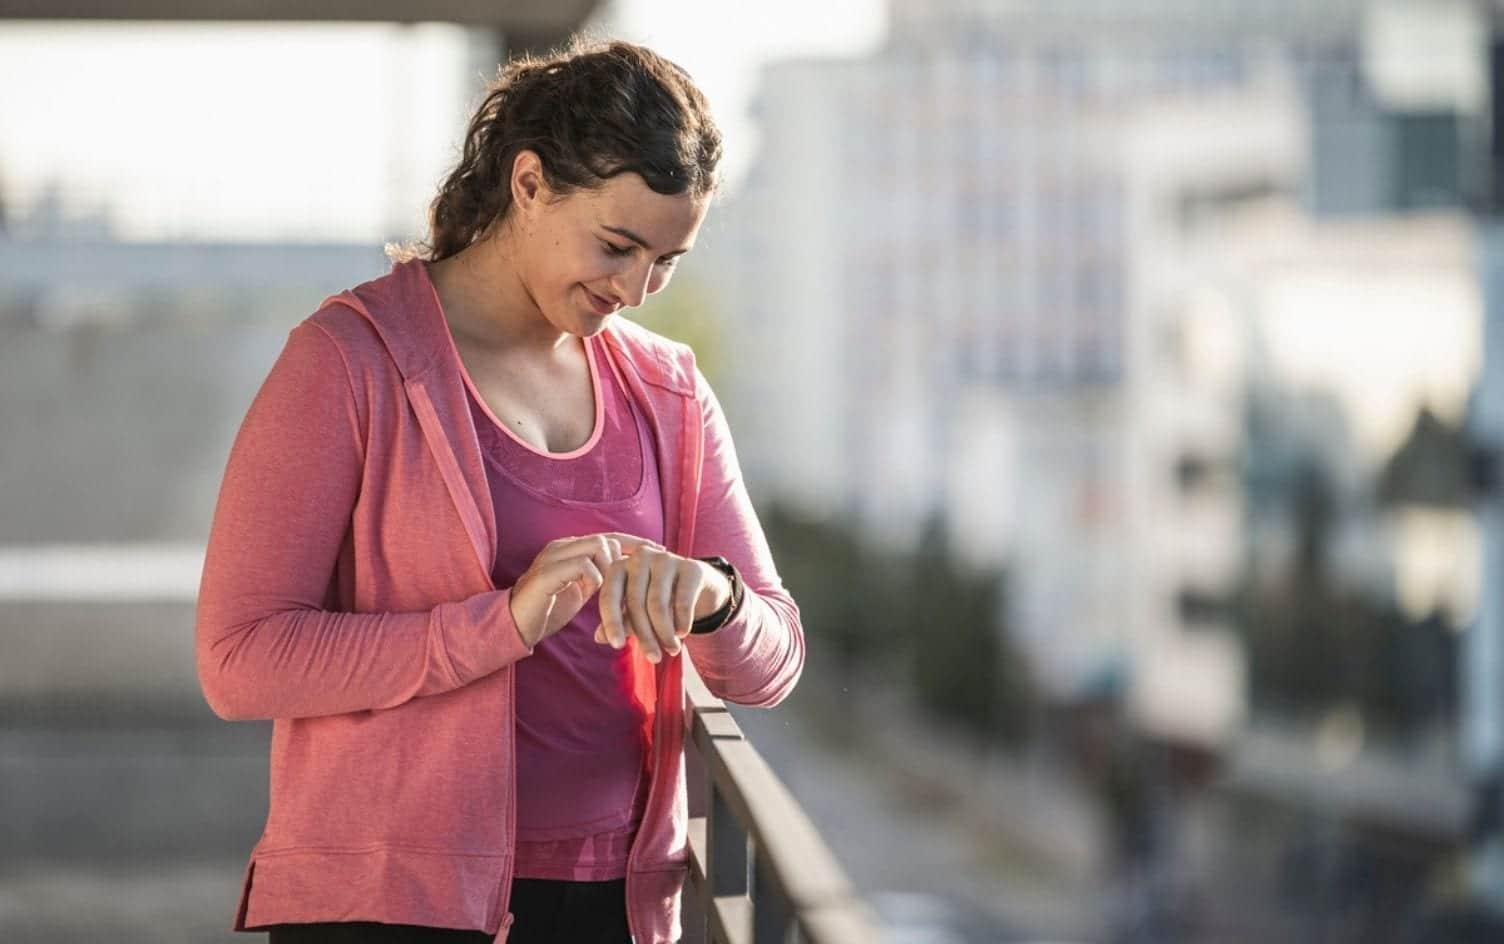 Steps, Miles, Minutes ... How to Measure Walking For Losing Weight